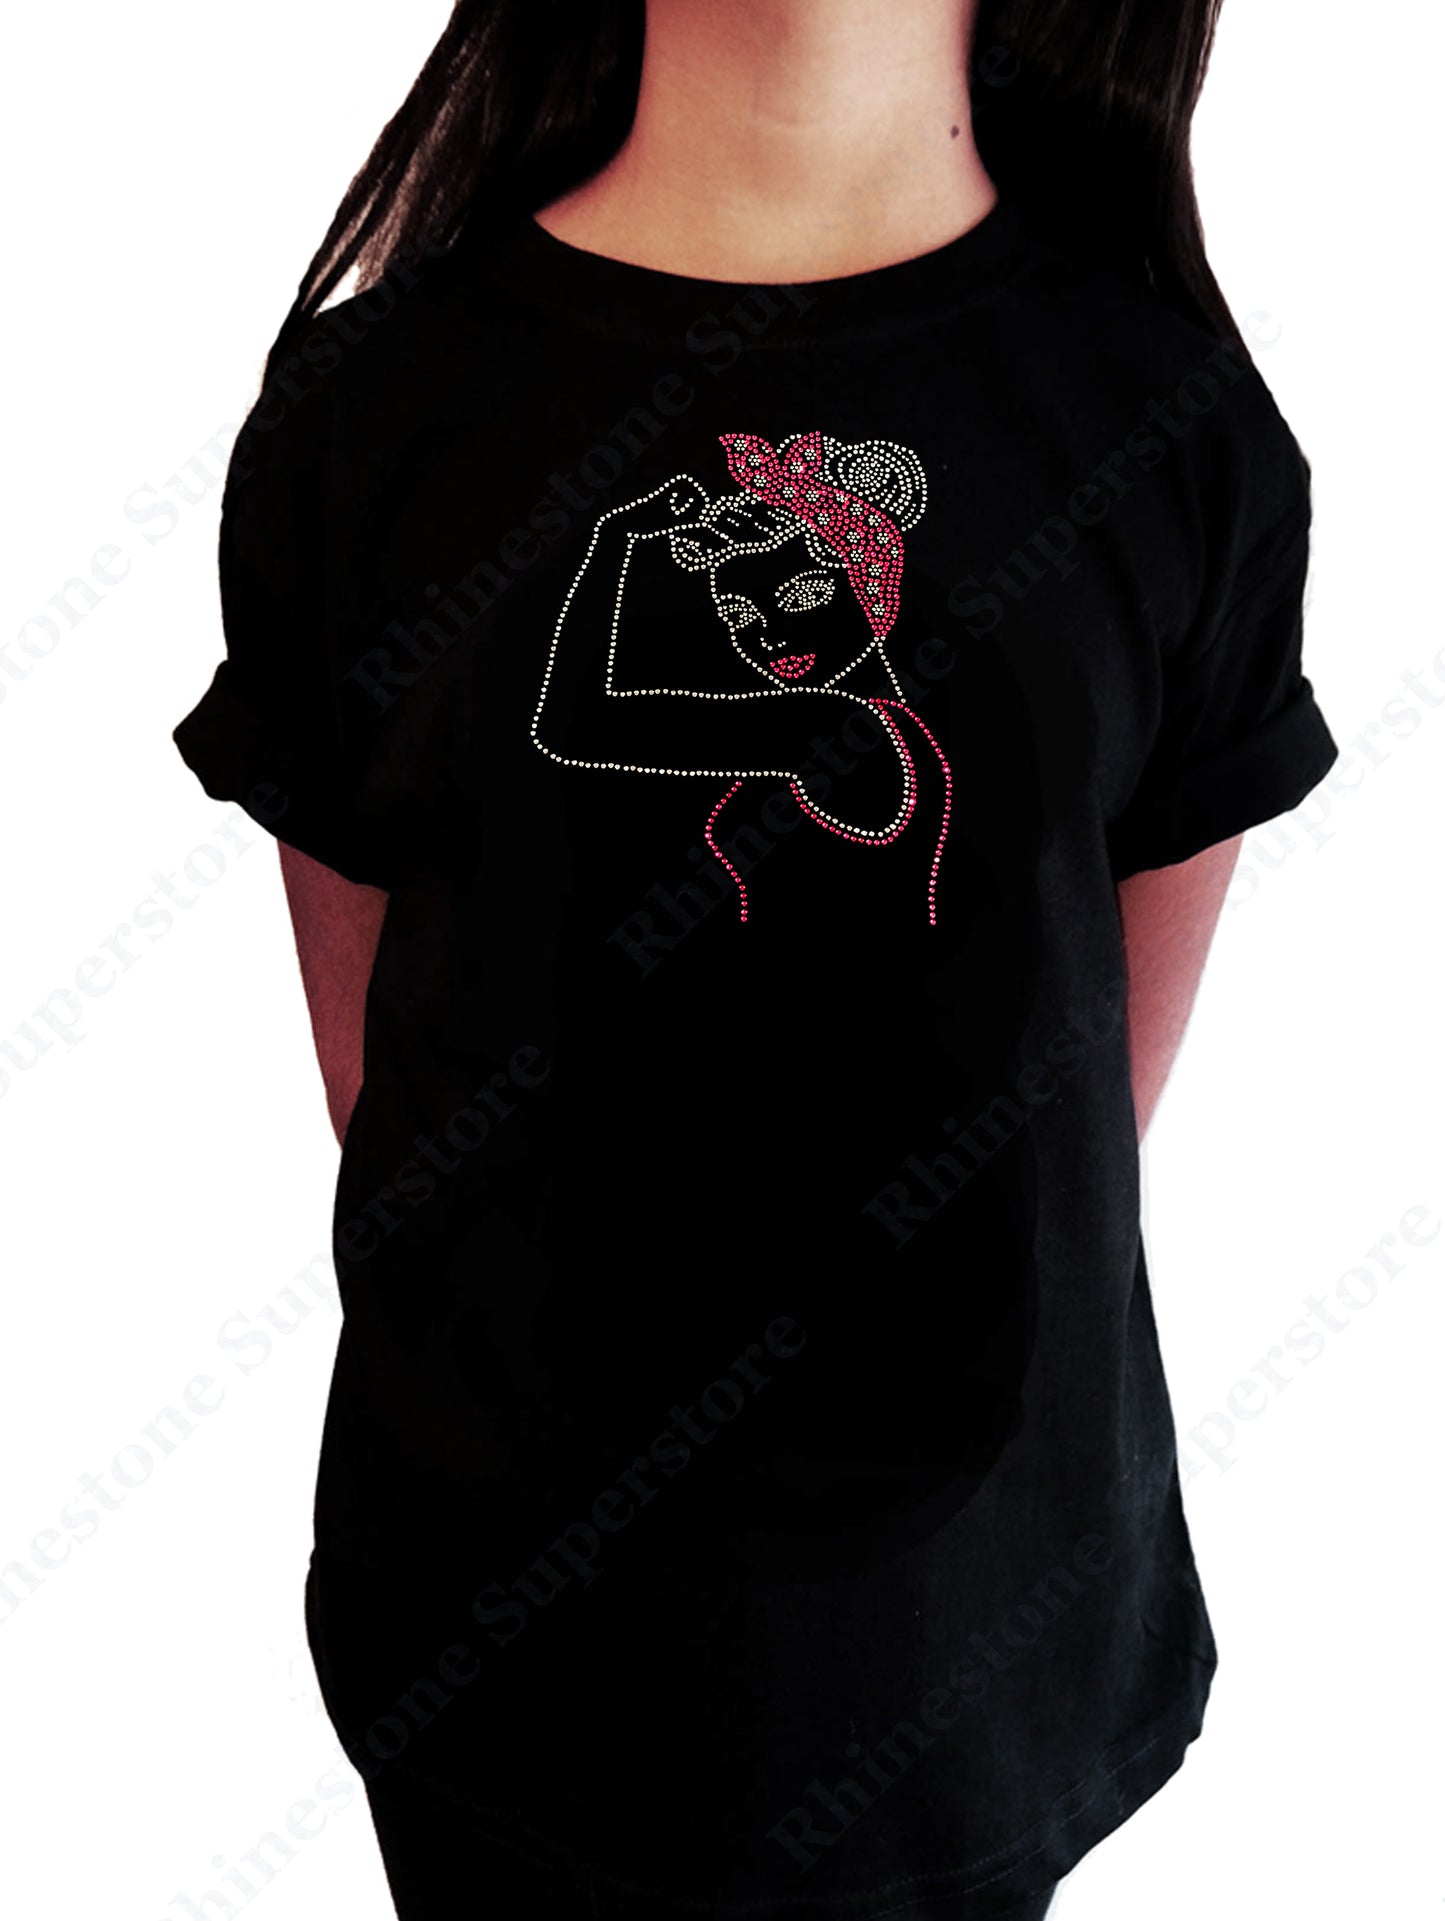 Girls Rhinestone T-Shirt " Pink Pin Up Girl " Kids Size 3 to 14 Available